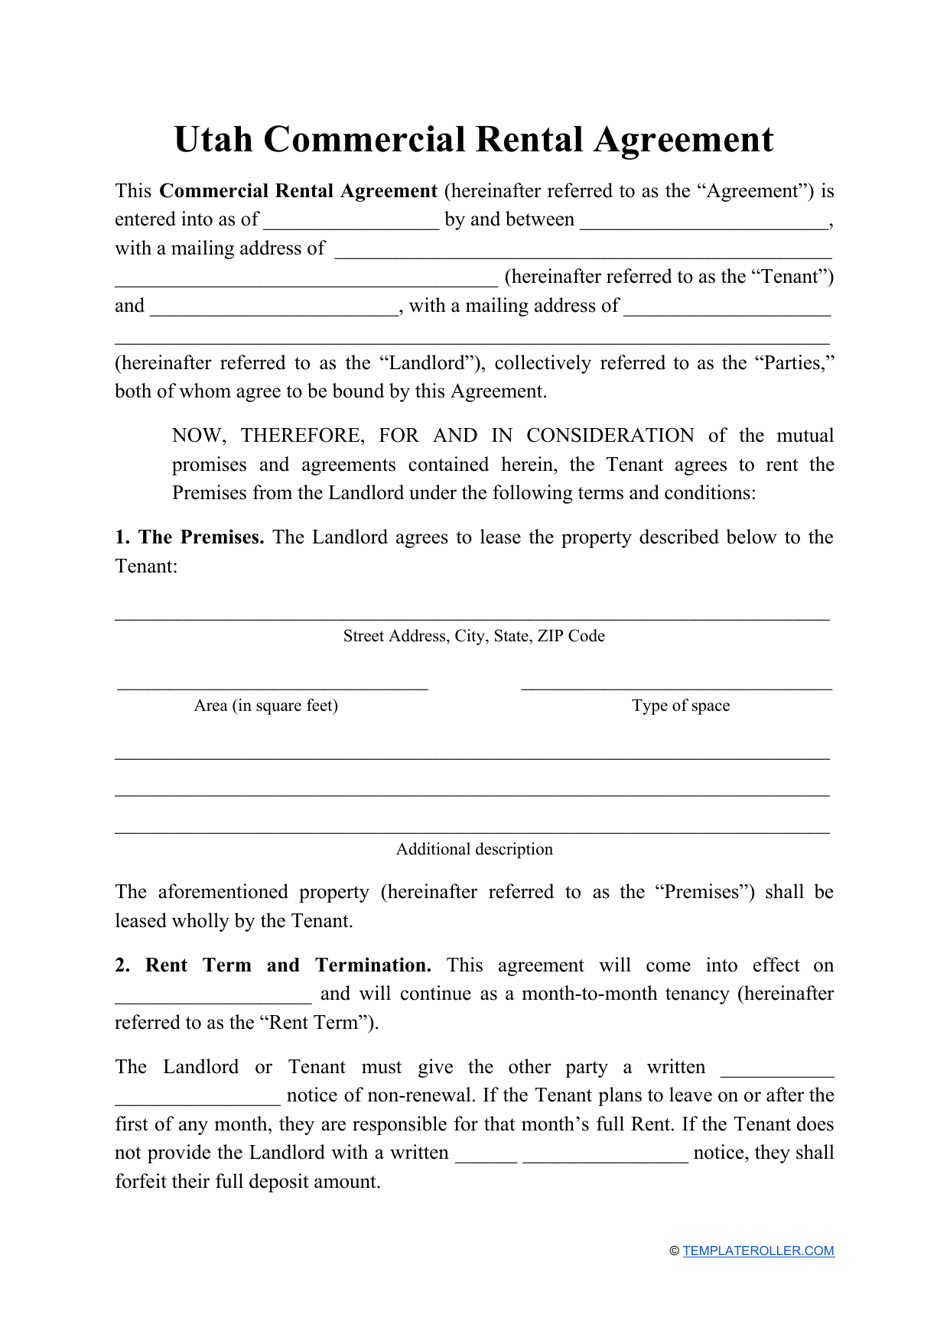 Commercial Rental Agreement Template - Utah, Page 1